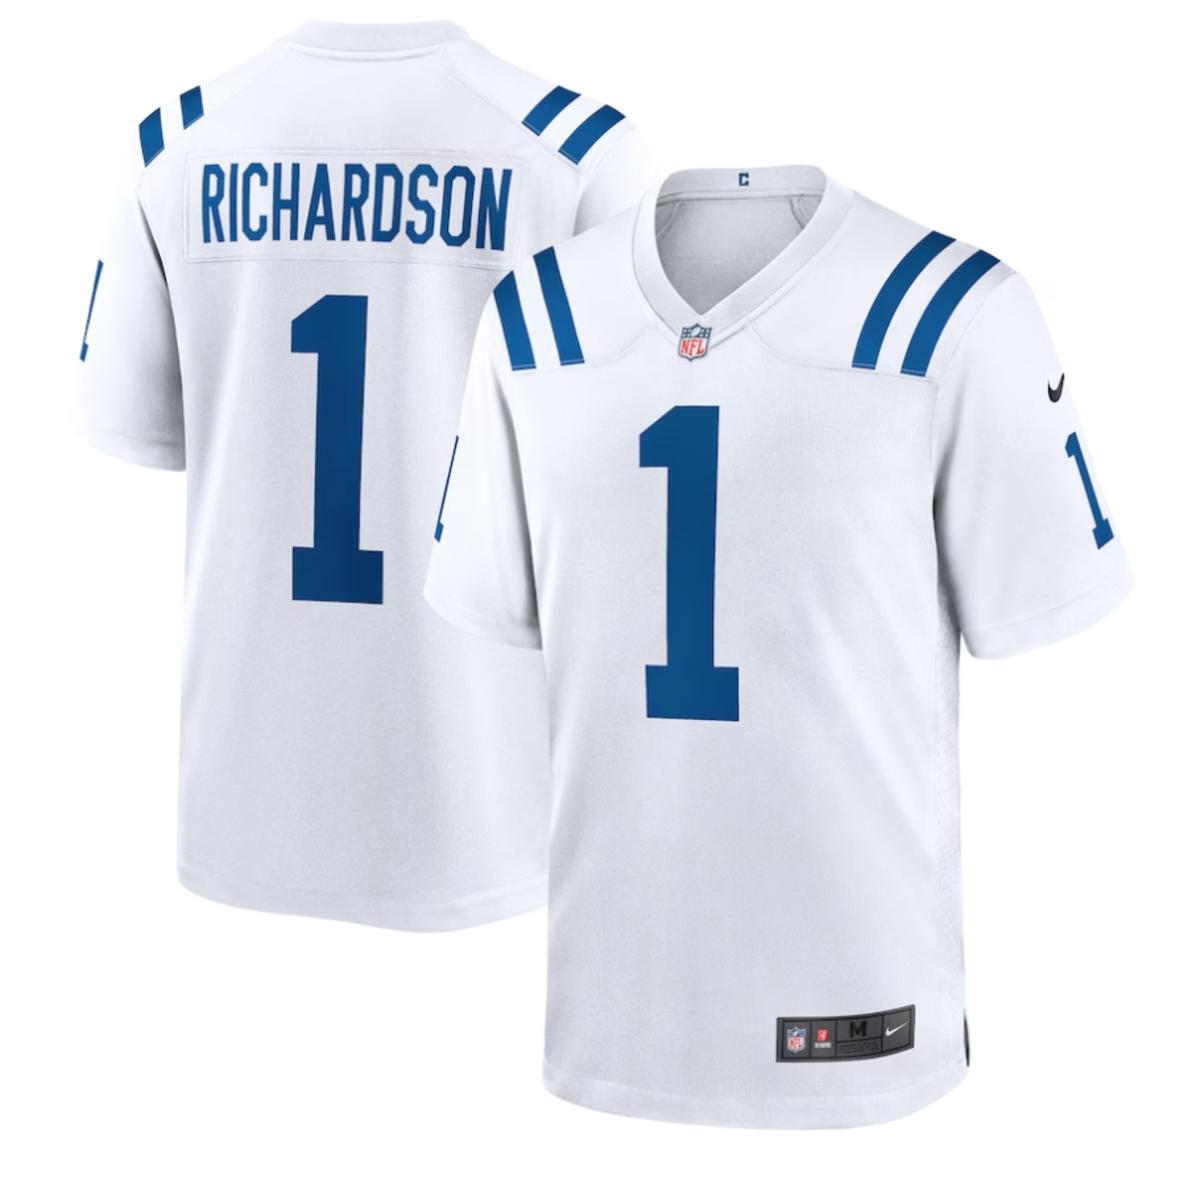 Indianapolis Colts Draft Gear, how to buy your Colts NFL Draft gear -  FanNation